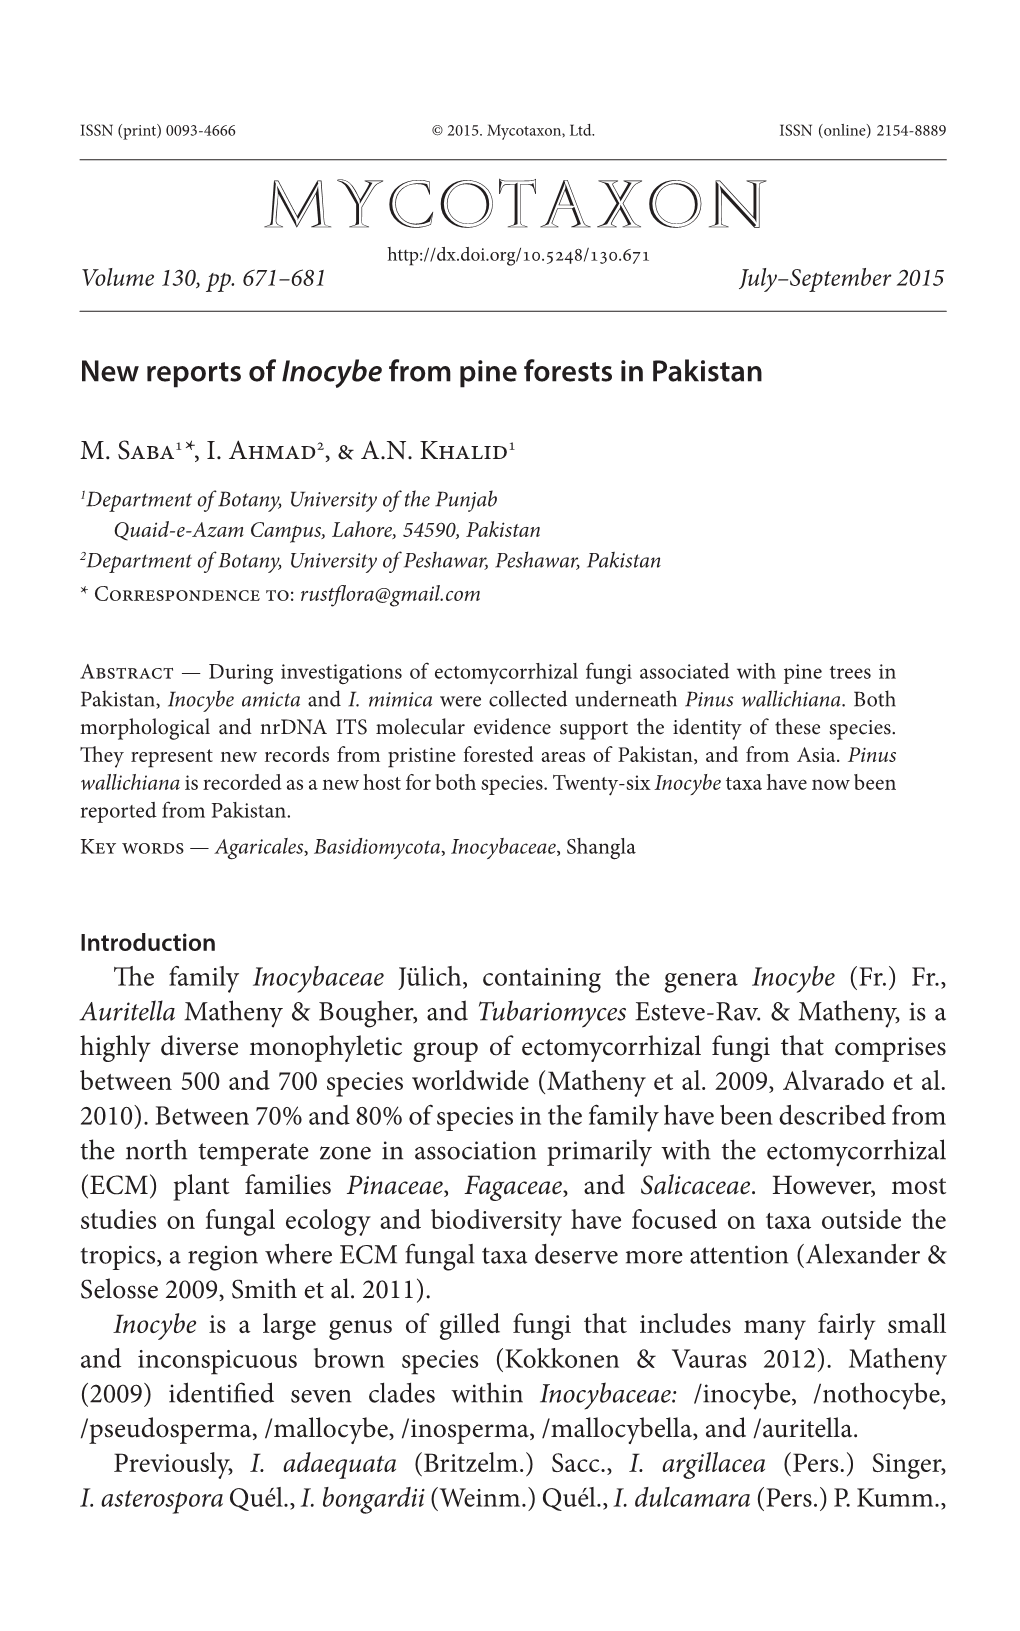 New Reports of &lt;I&gt;Inocybe&lt;/I&gt; from Pine Forests in Pakistan